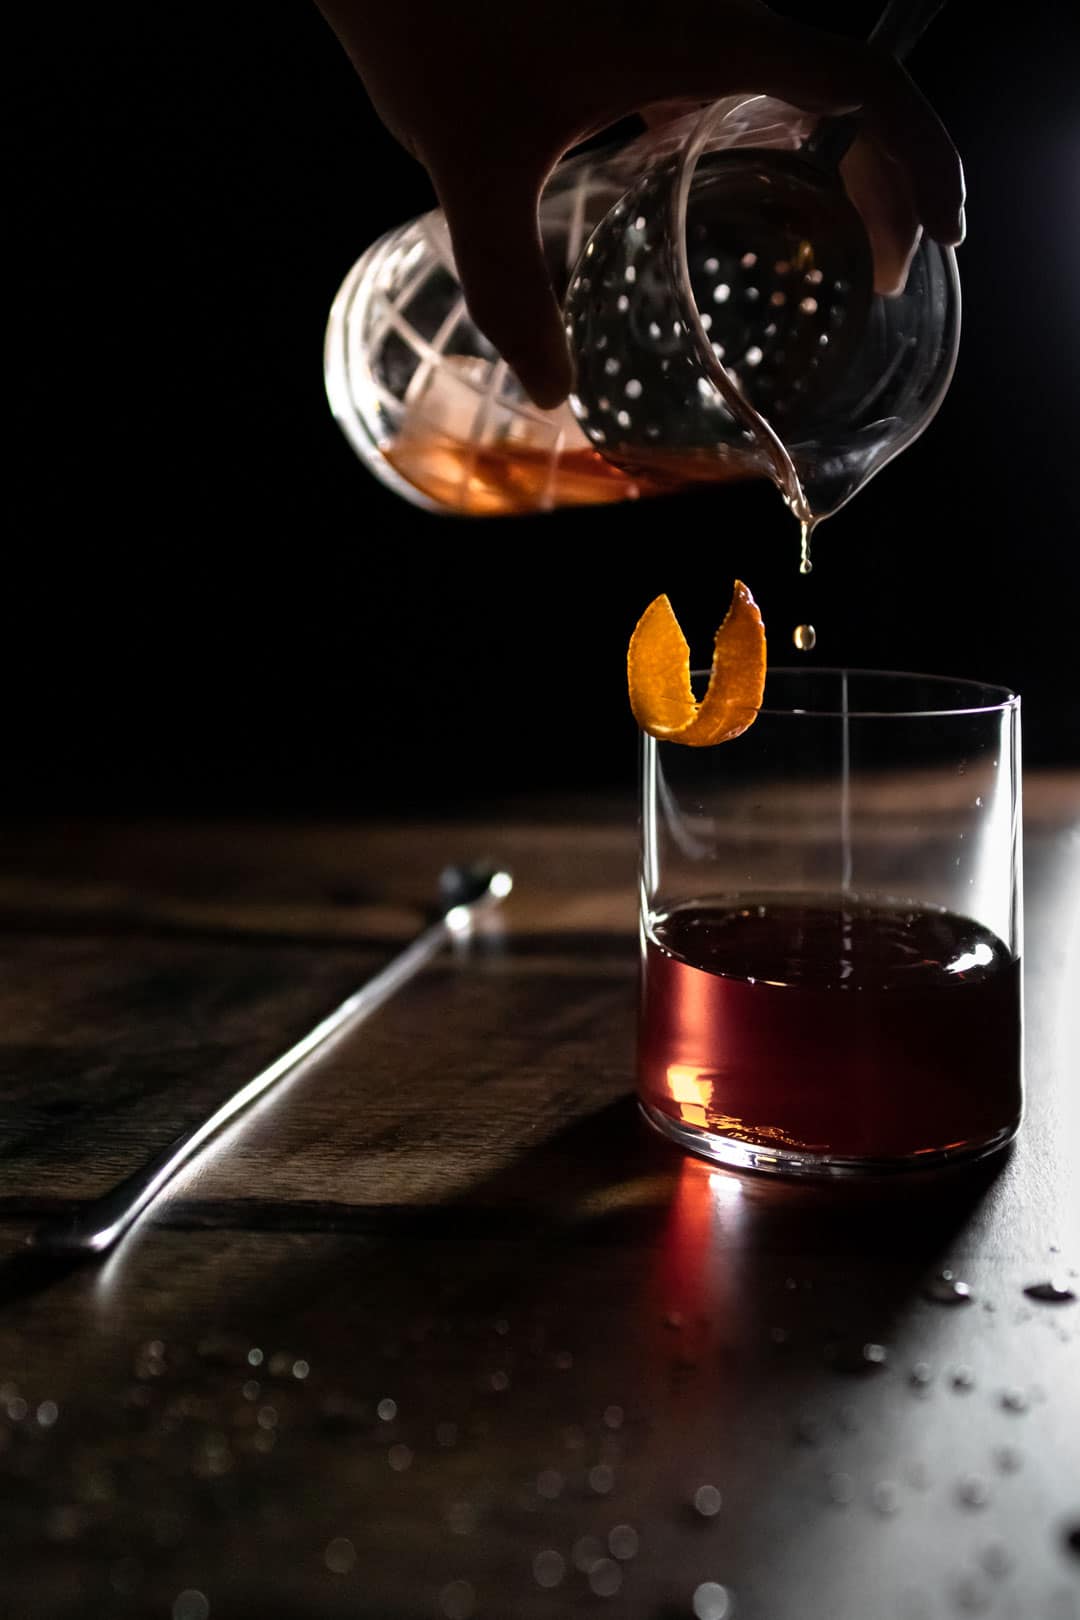 The last drops of a Cynar toronto cocktail being poured from a yari into an old fashioned glass garnished with an orange peel. The glass is next to a long bar spoon and droplets of water on the table.